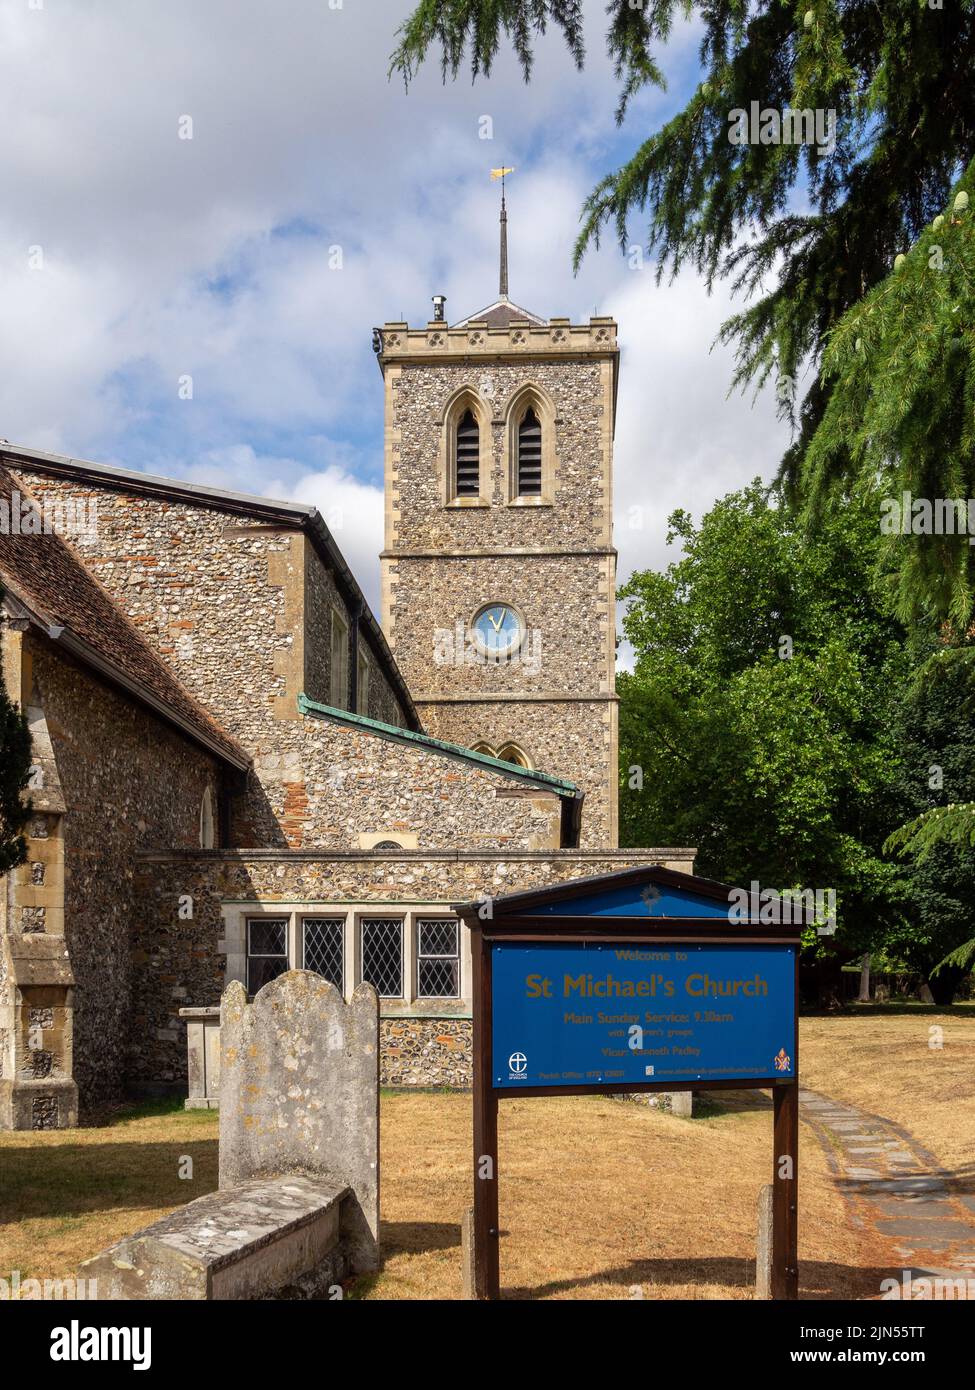 Parish church of St Michael, St Albans, Hertfordshire, UK; earliest parts date from 10th century Stock Photo